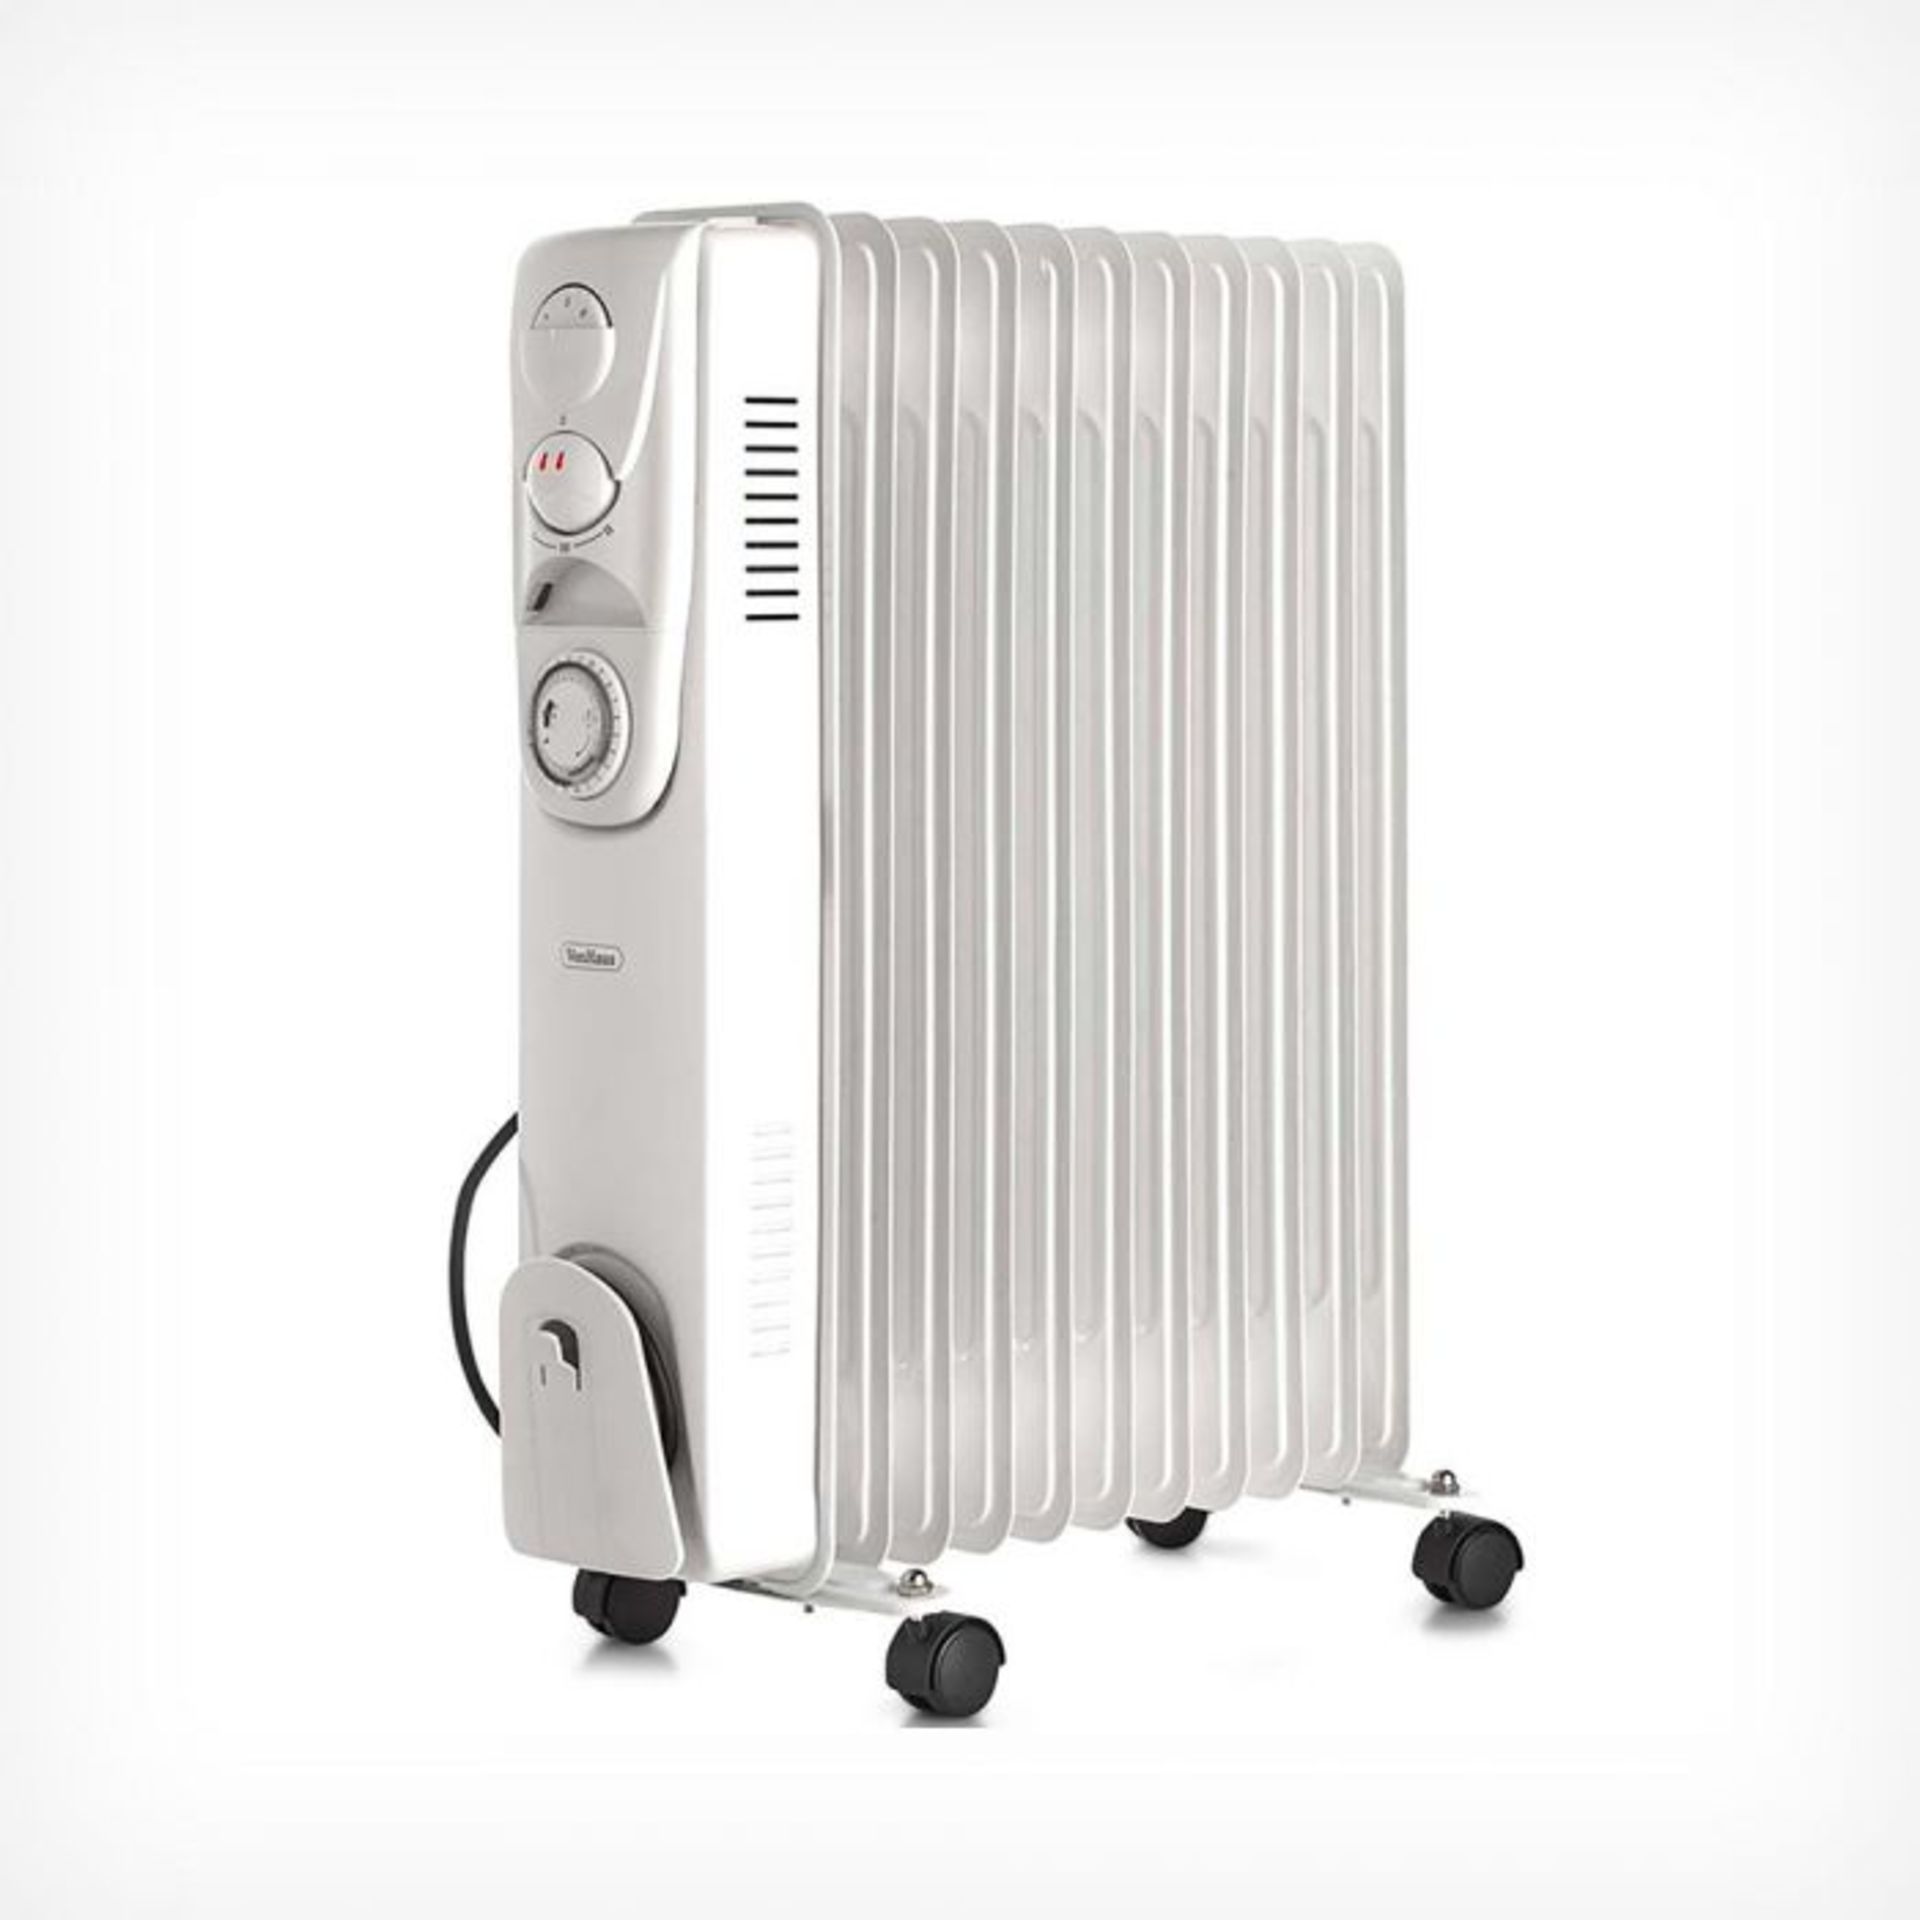 (V25) 11 Fin 2500W Oil Filled Radiator - White Suitable for areas up to 28 square metres 3 po... - Image 2 of 3